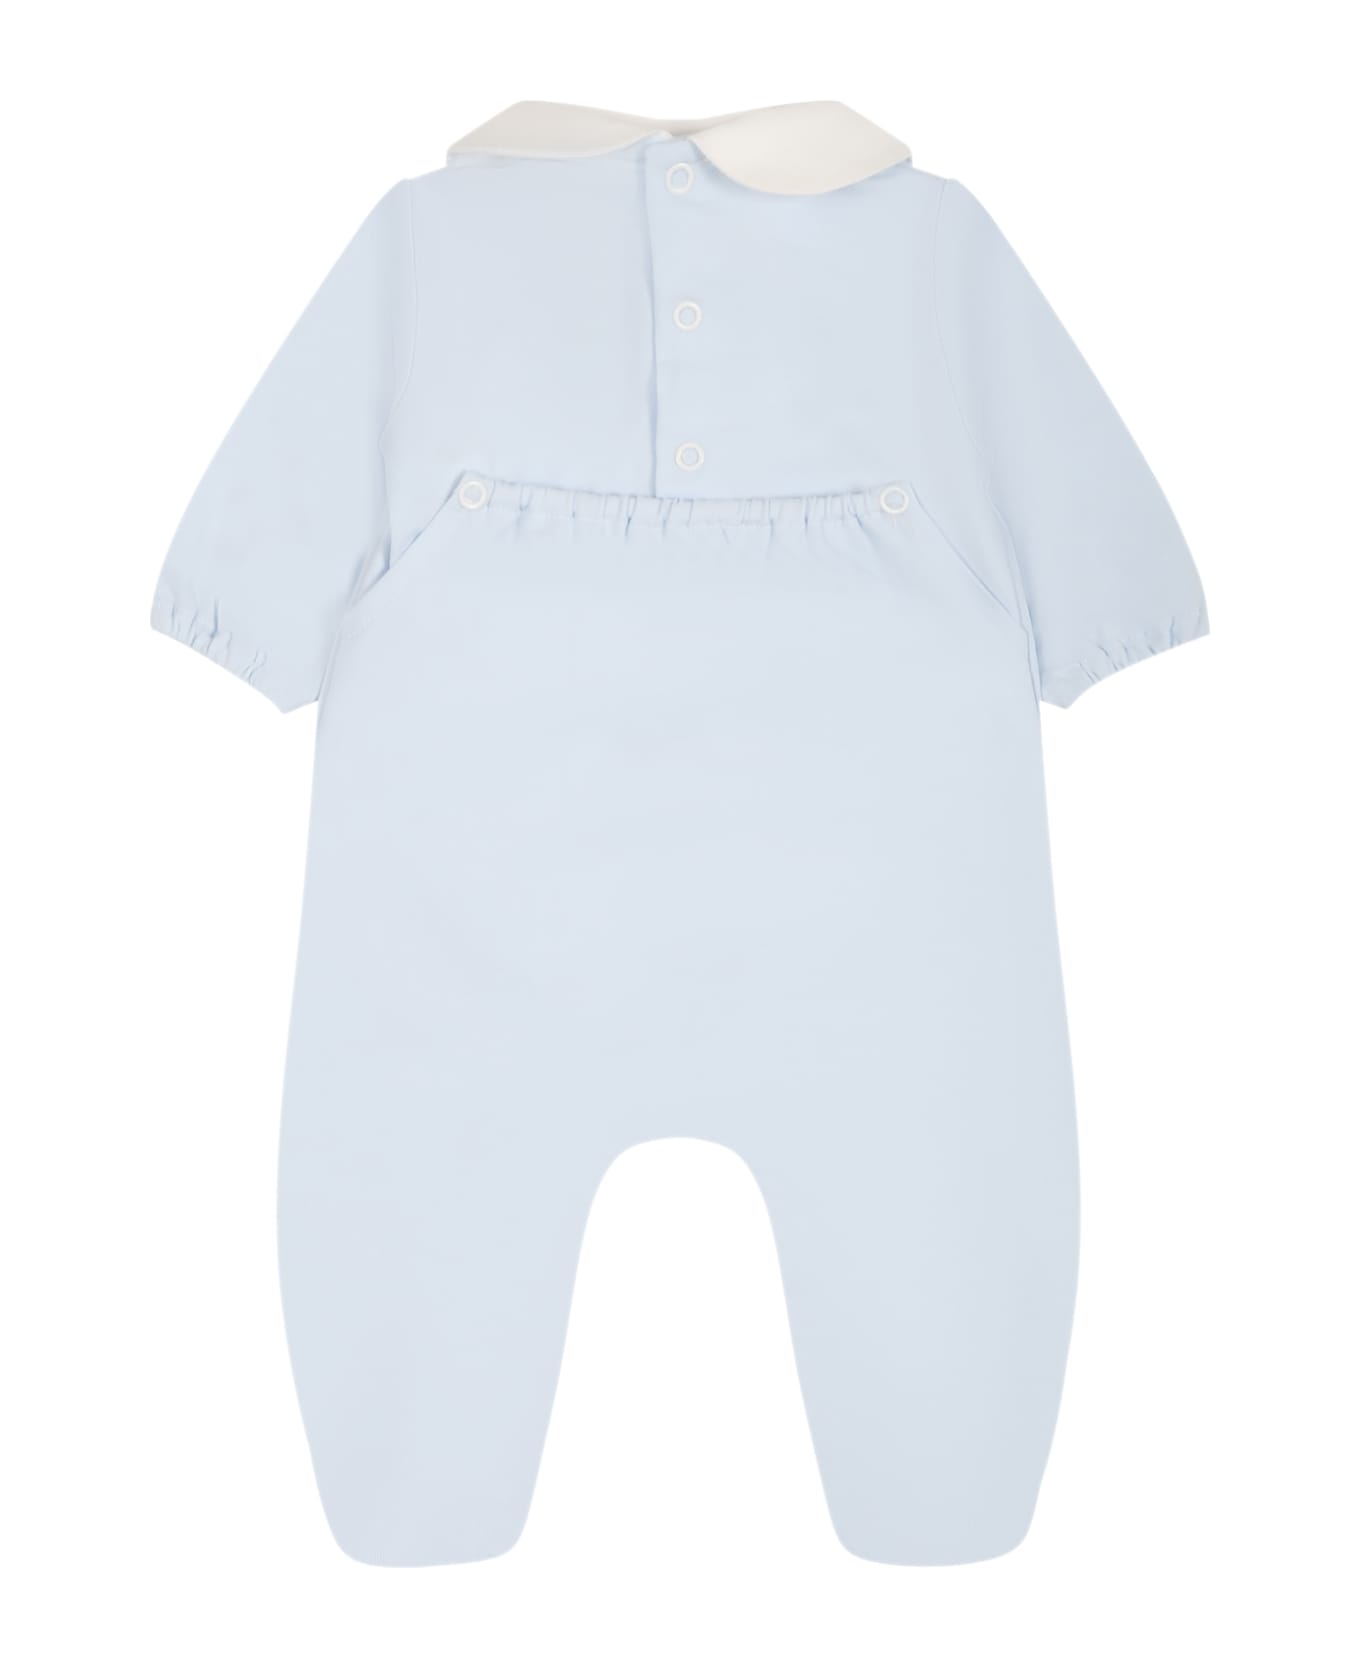 Little Bear Light Blue Onesie For Baby Boy With Preston And Heart - Cielo